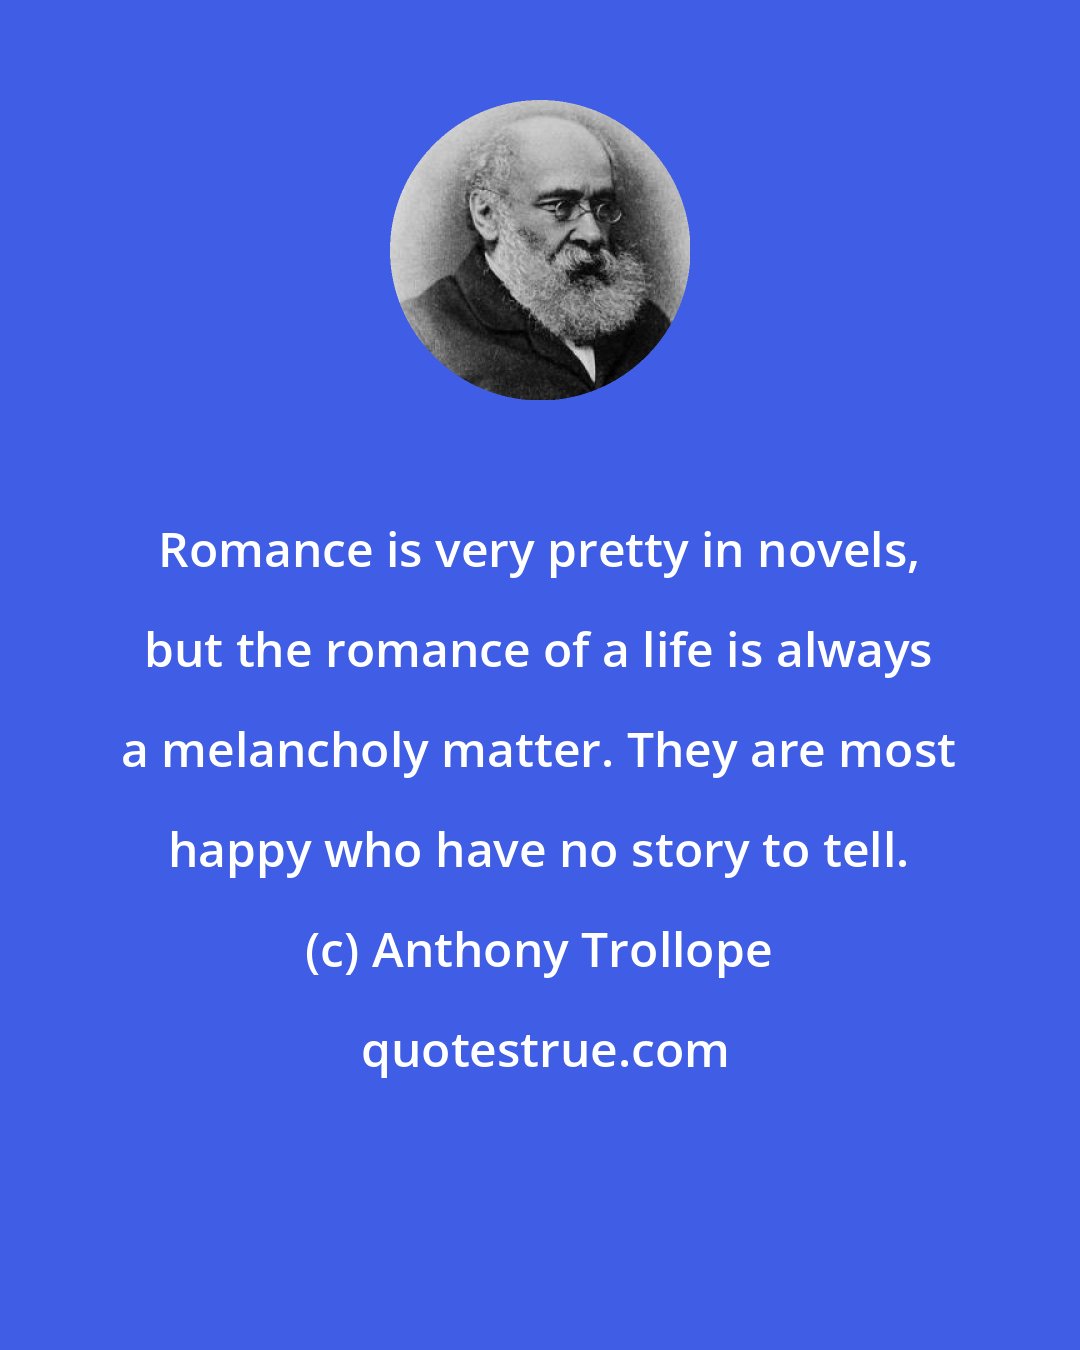 Anthony Trollope: Romance is very pretty in novels, but the romance of a life is always a melancholy matter. They are most happy who have no story to tell.